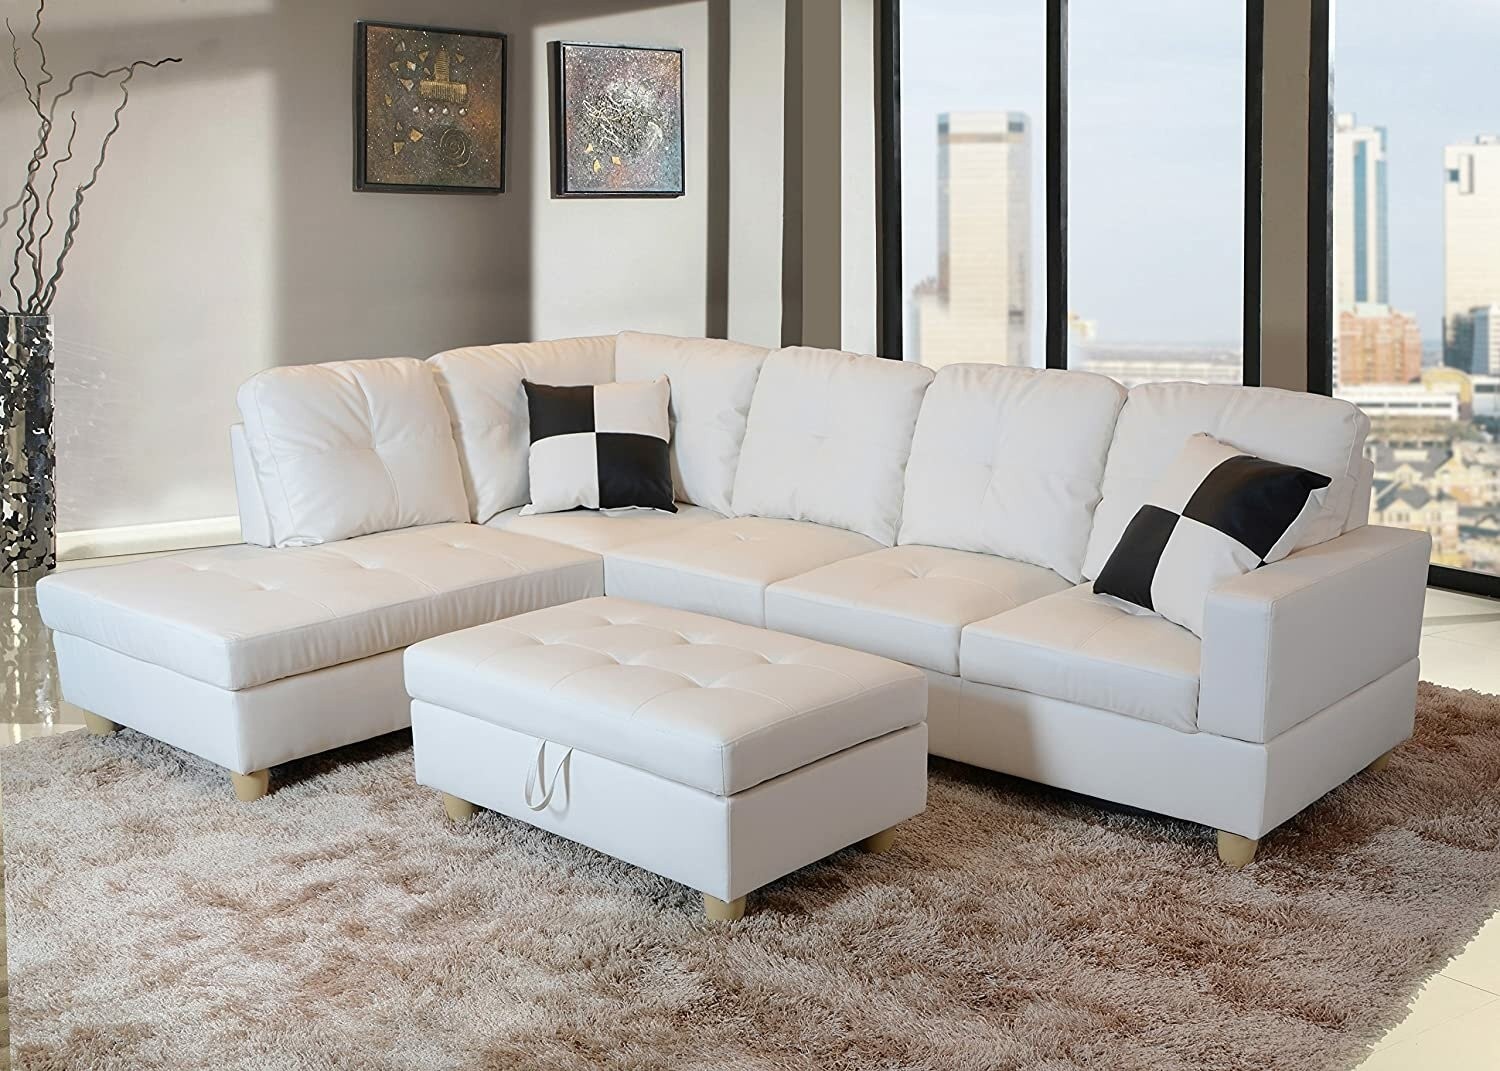 Delma 3 Pc White Faux Leather Left Chaise Sectional Set With Storage Ottoman